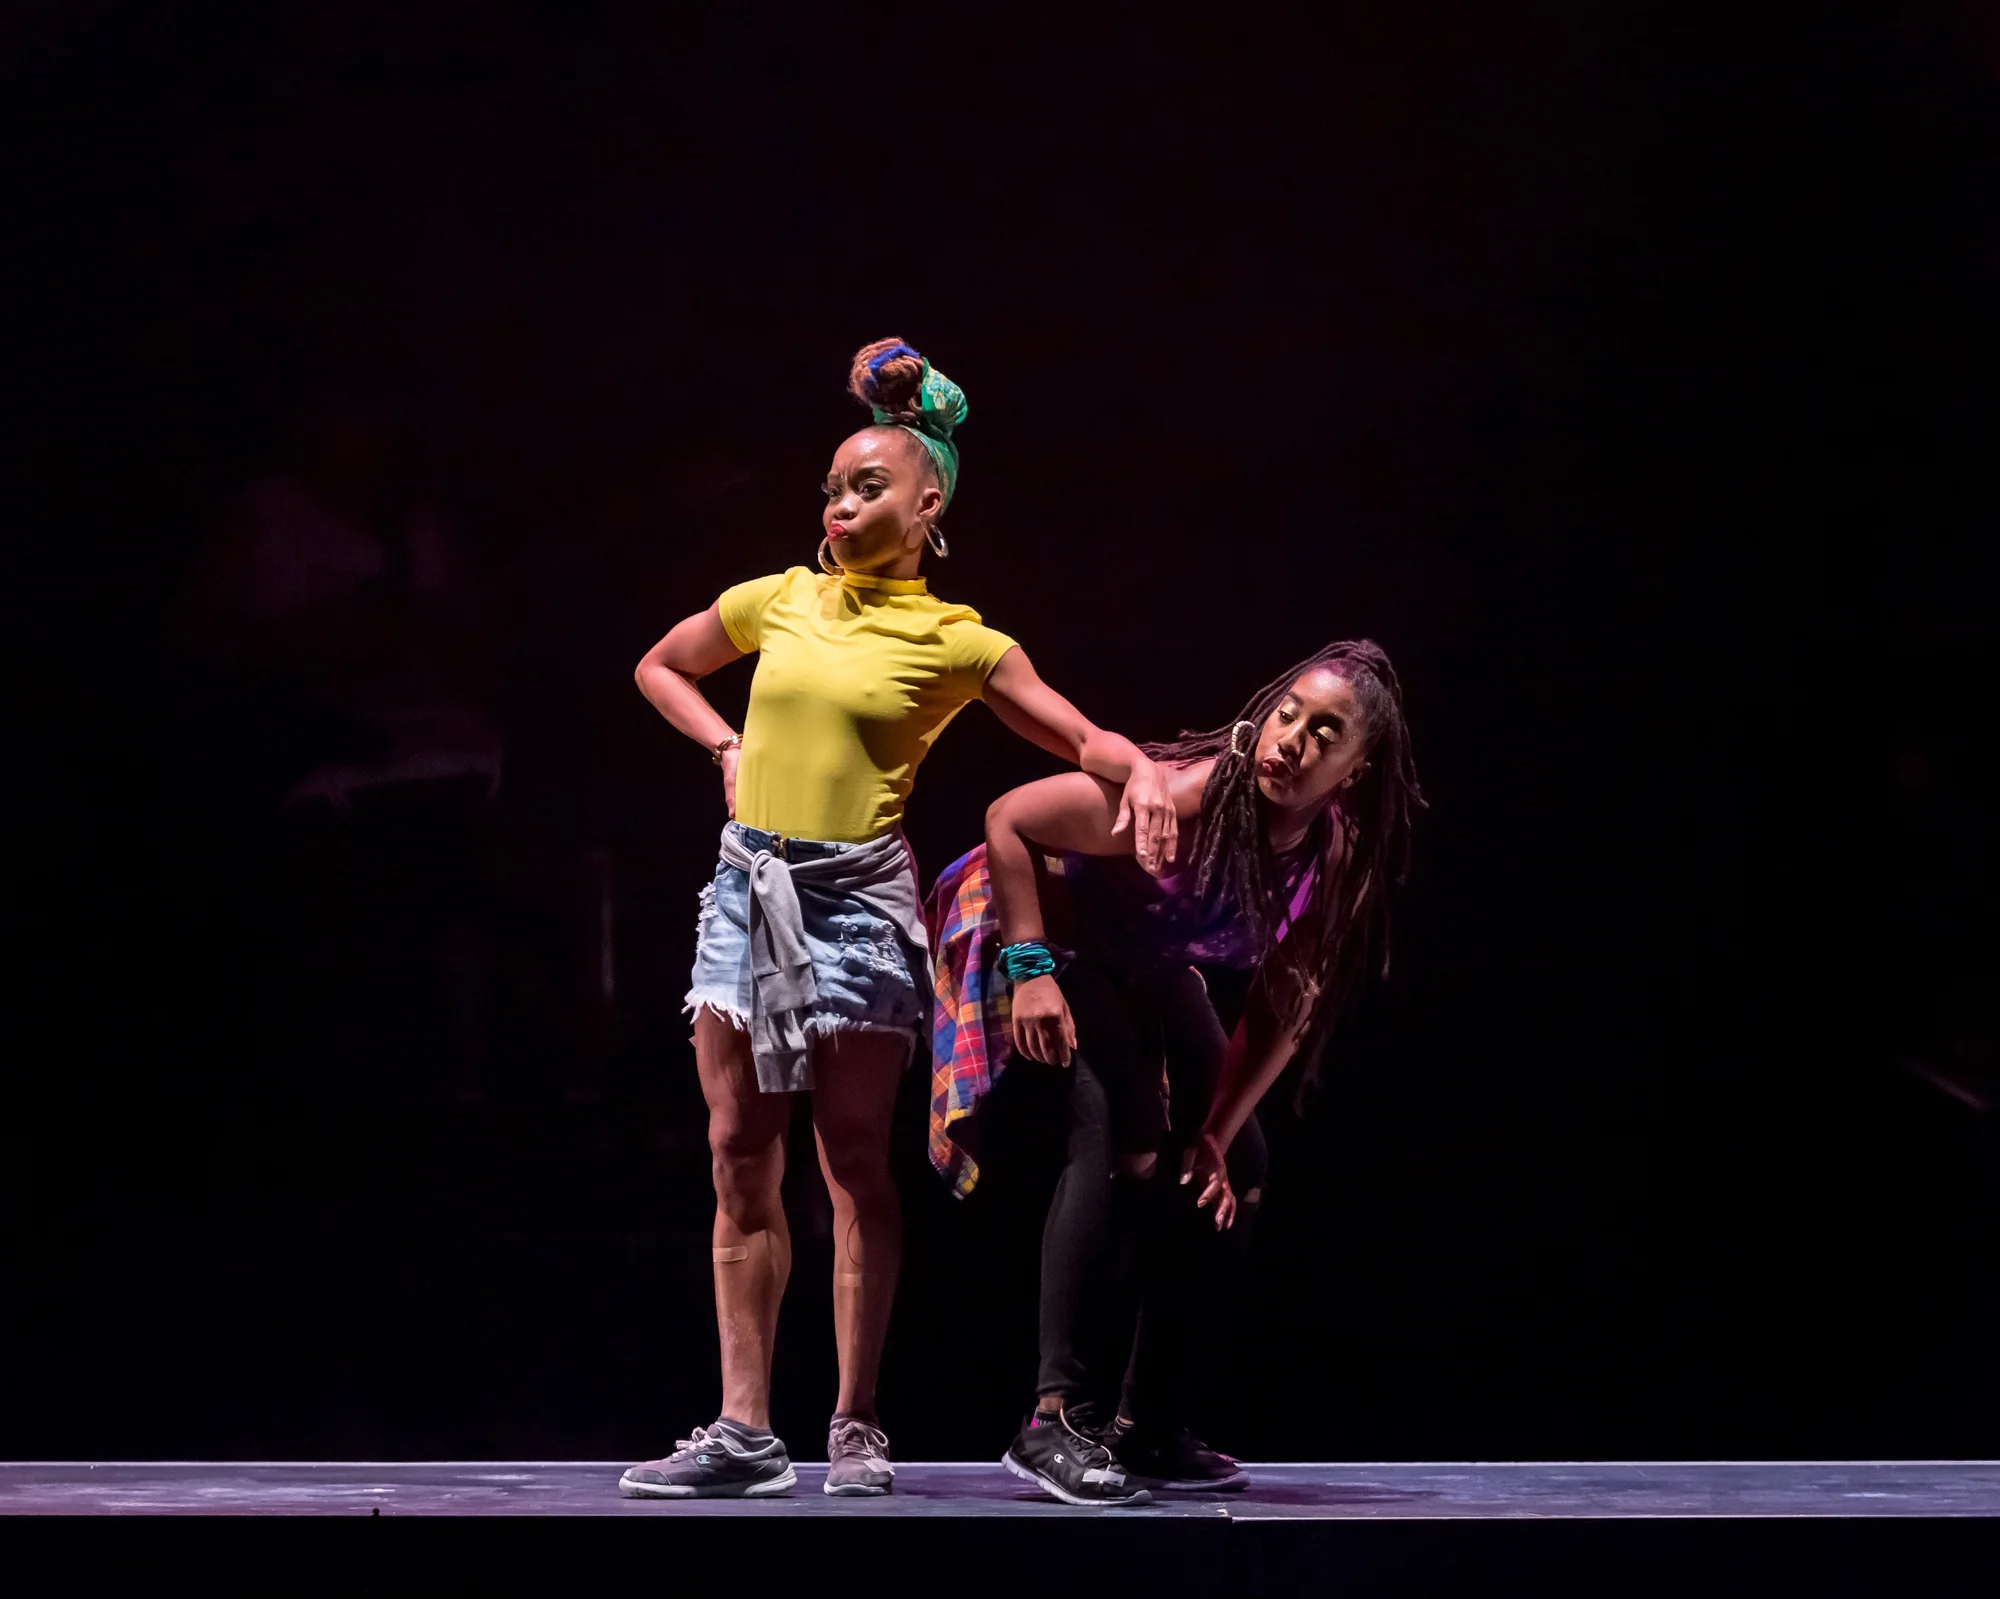 Color photograph of two women on a stage. One woman is bent over, seemingly in a dance position. She wears black leggings, a purple top, and a plaid top tied around her waist. The second woman keeps her arm on the other woman’s shoulder. She wears a yellow shirt, denim shorts, and sneakers.